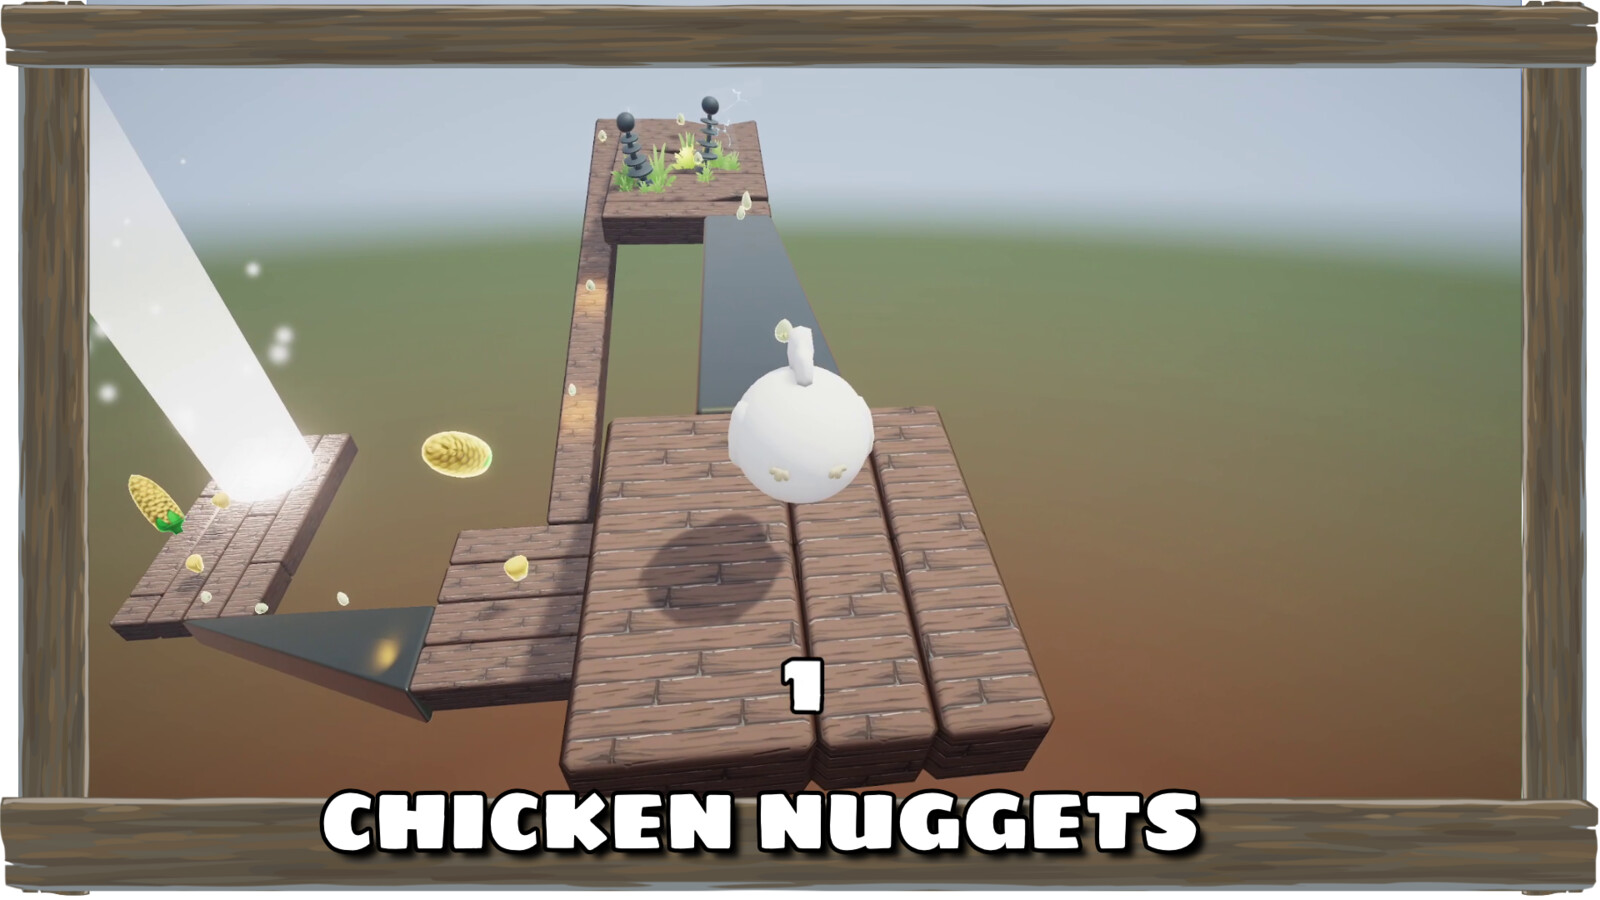 Some levels in Chicken Nuggets focus on technical challenges.